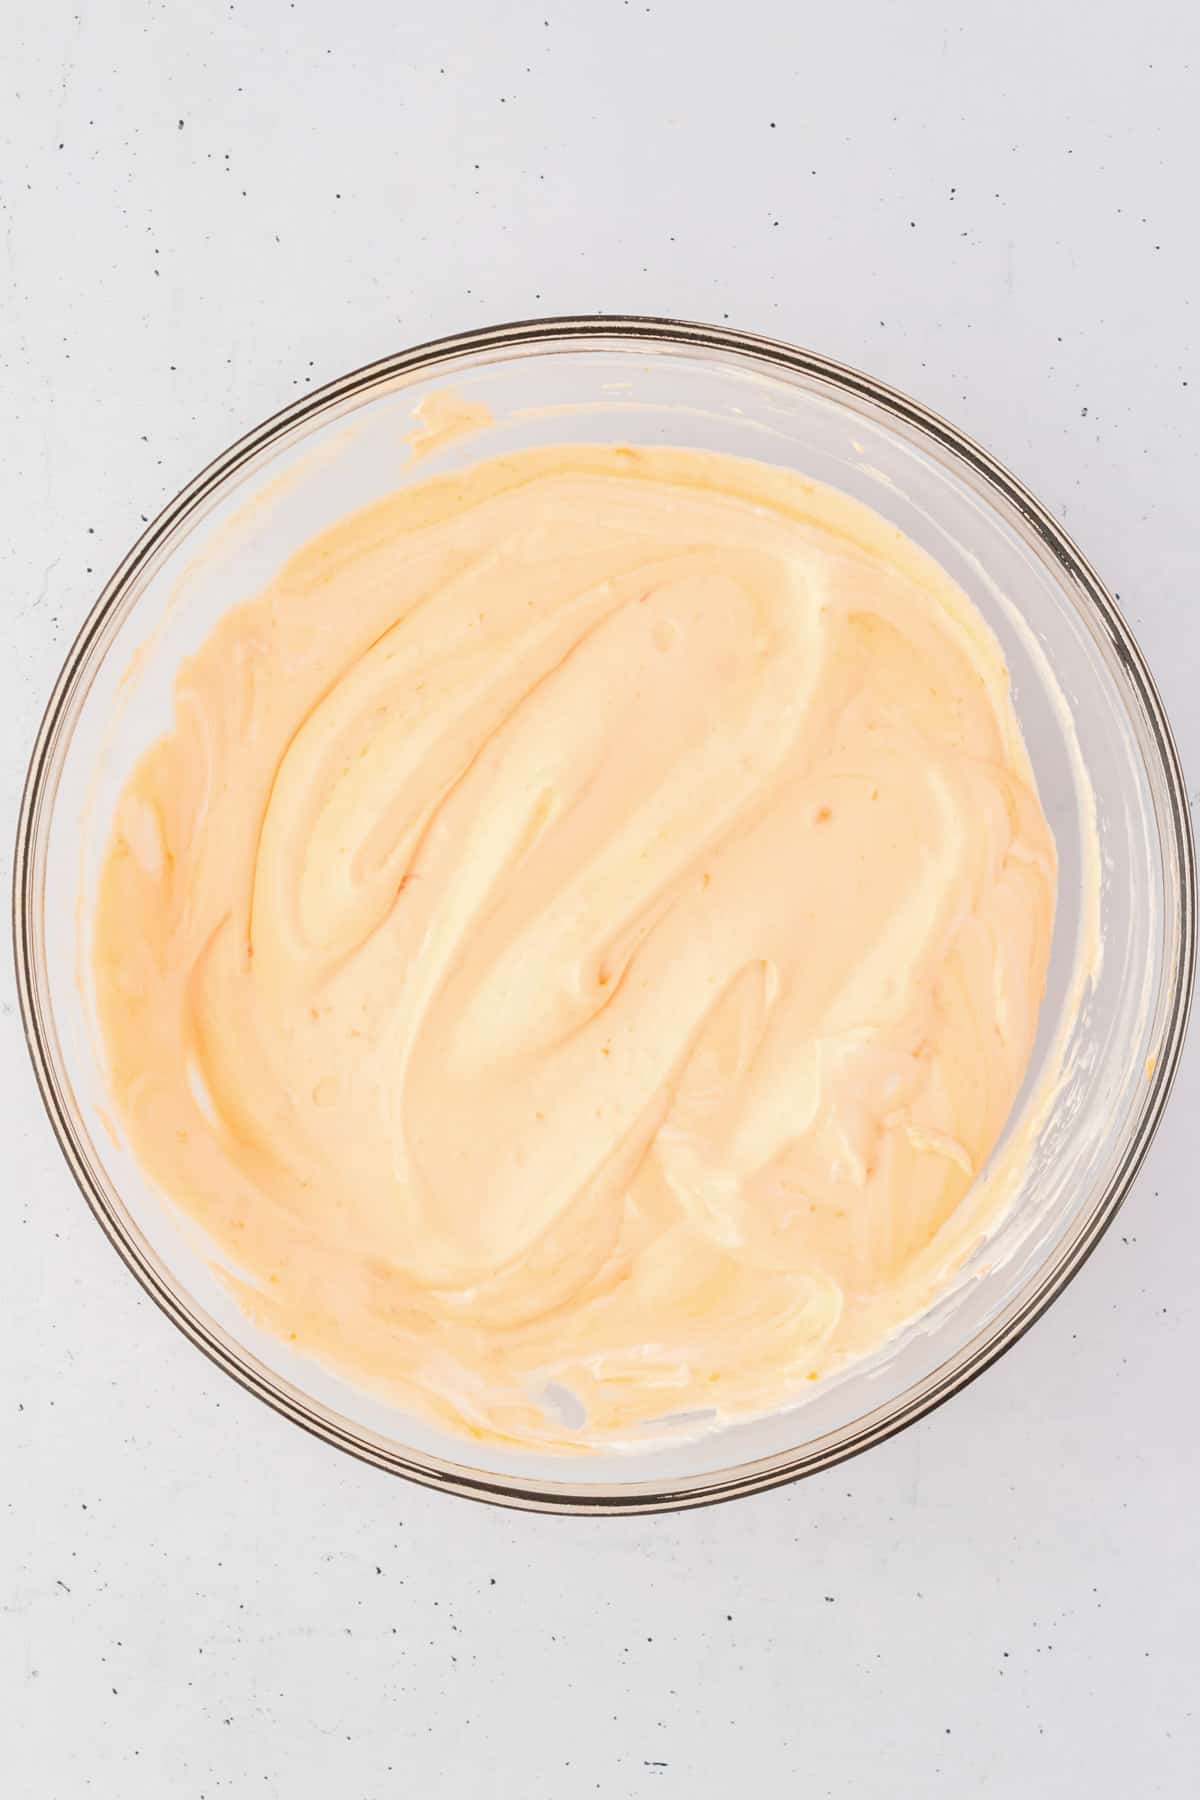 the creamy mixture for orange fluff salad in a glass bowl